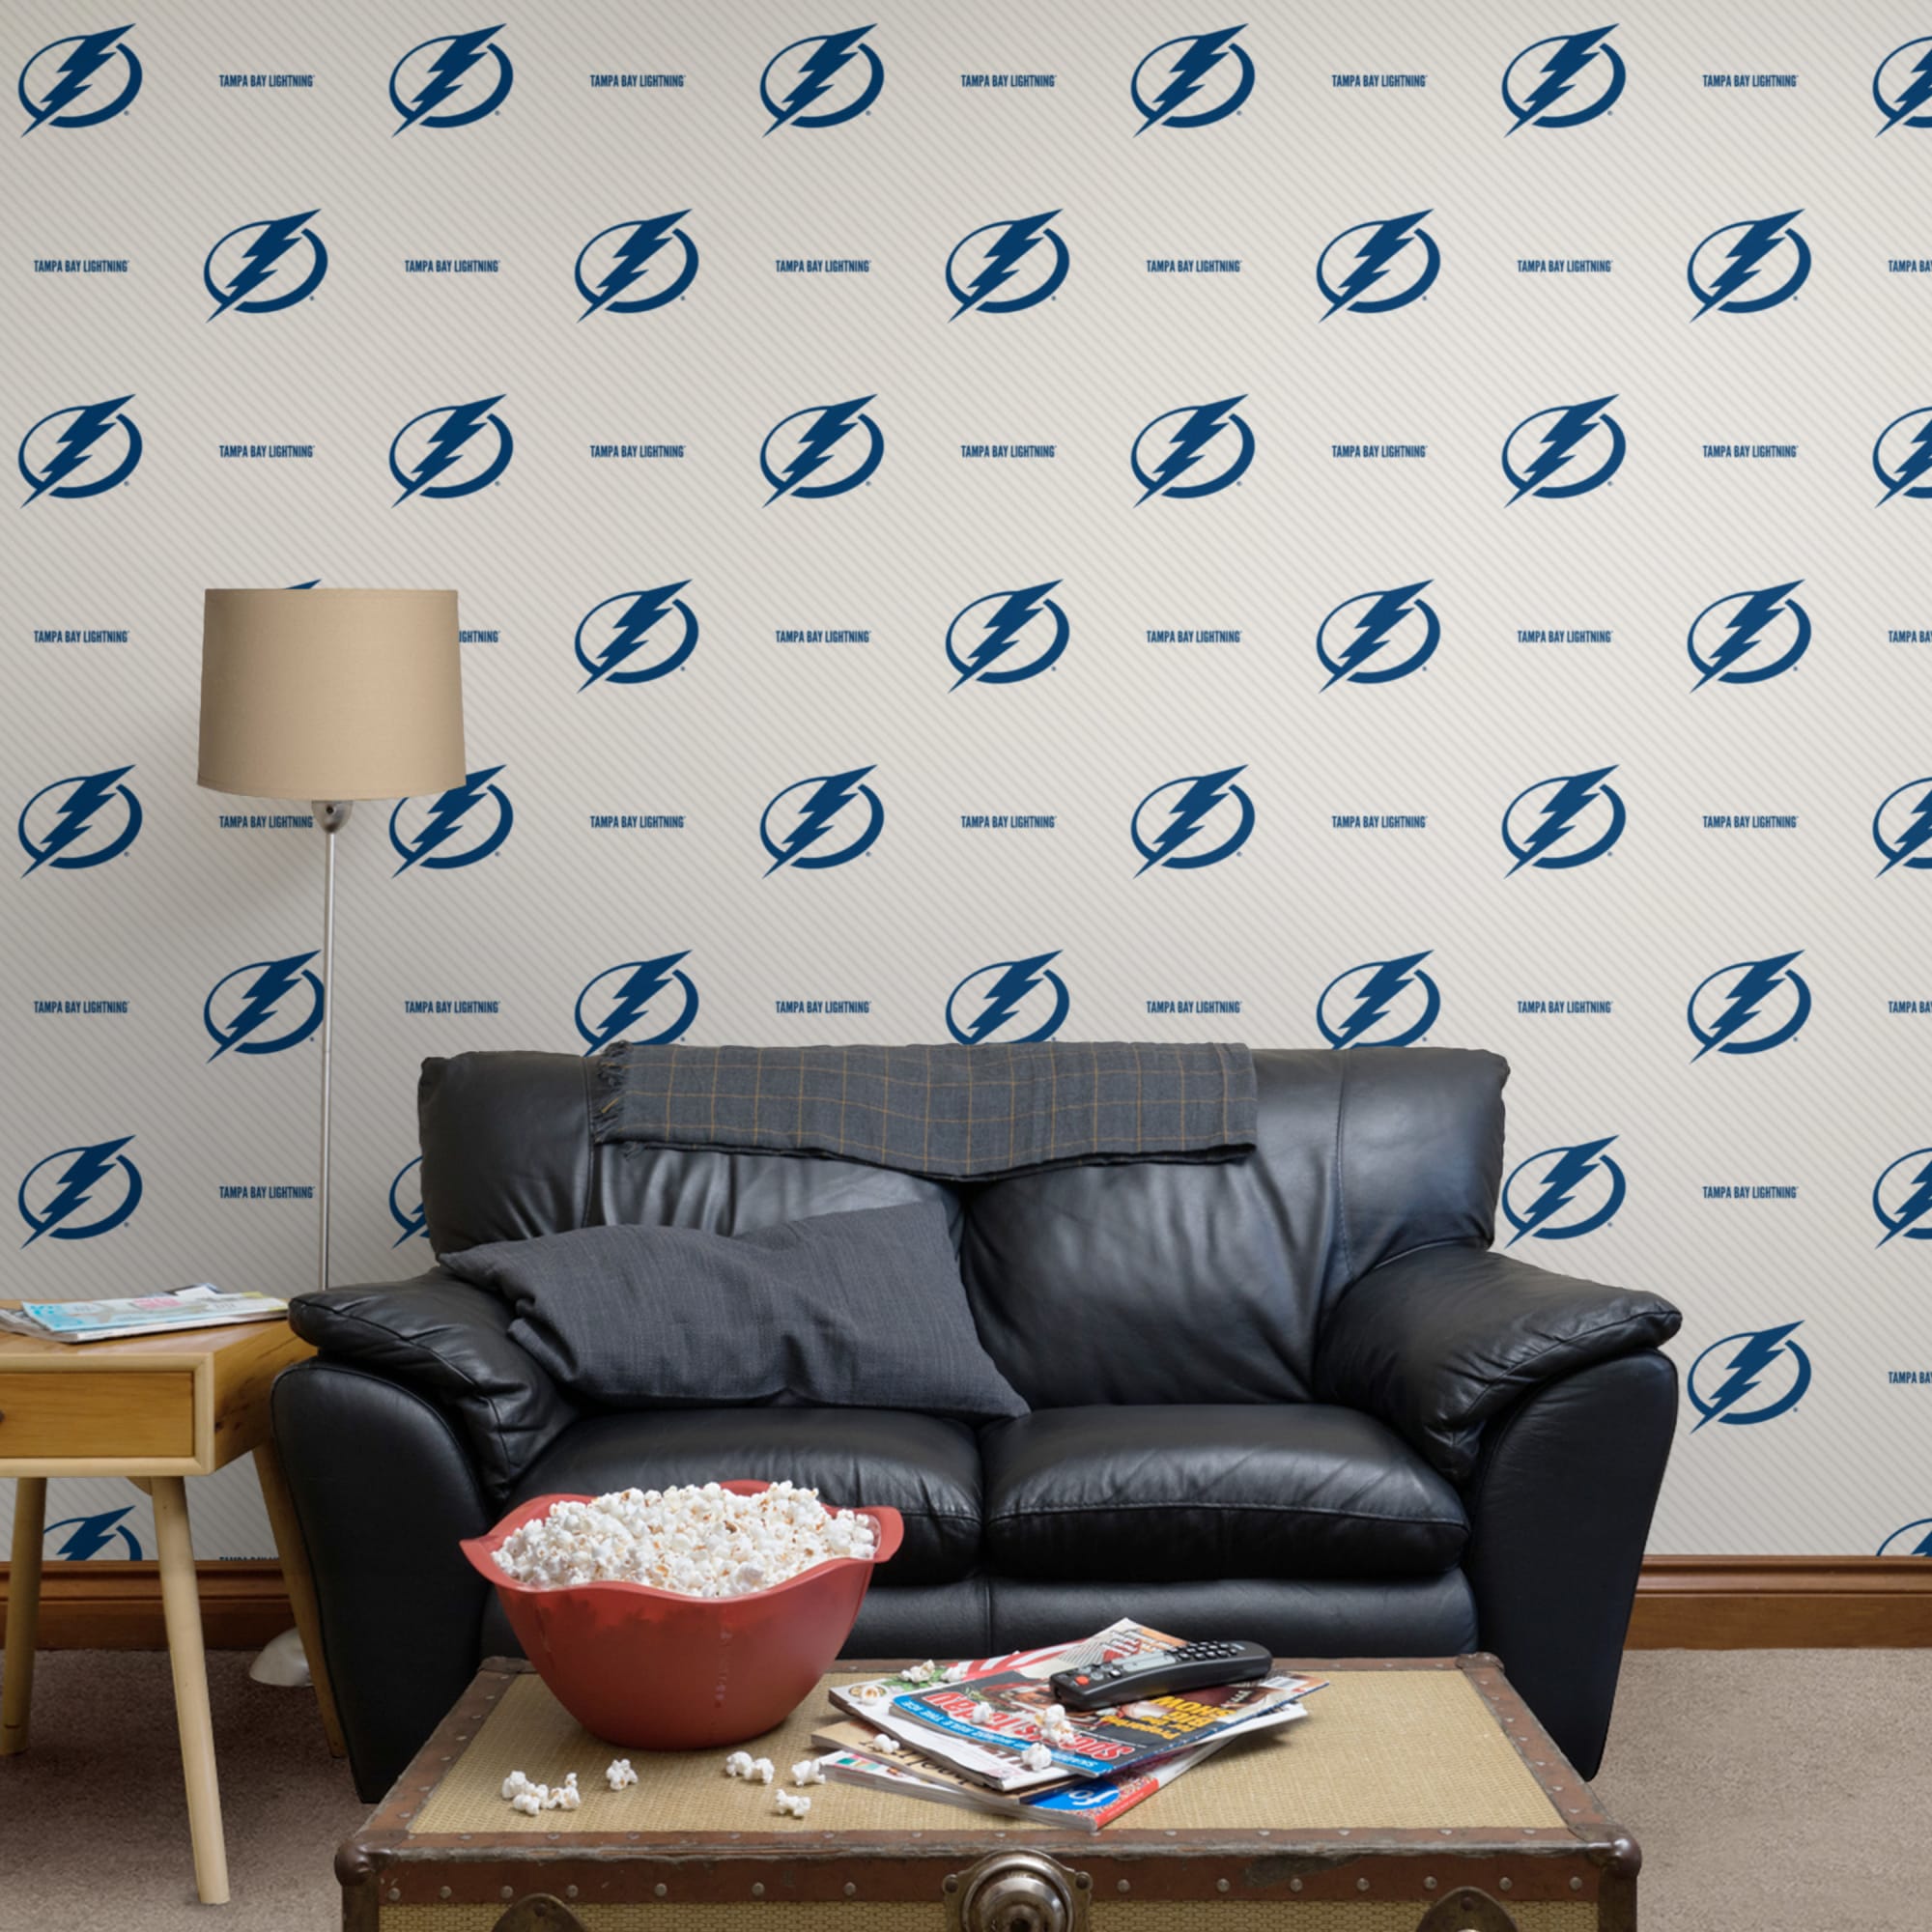 Tampa Bay Lightning: Stripes Pattern - Officially Licensed NHL Removable Wallpaper 12" x 12" Sample by Fathead